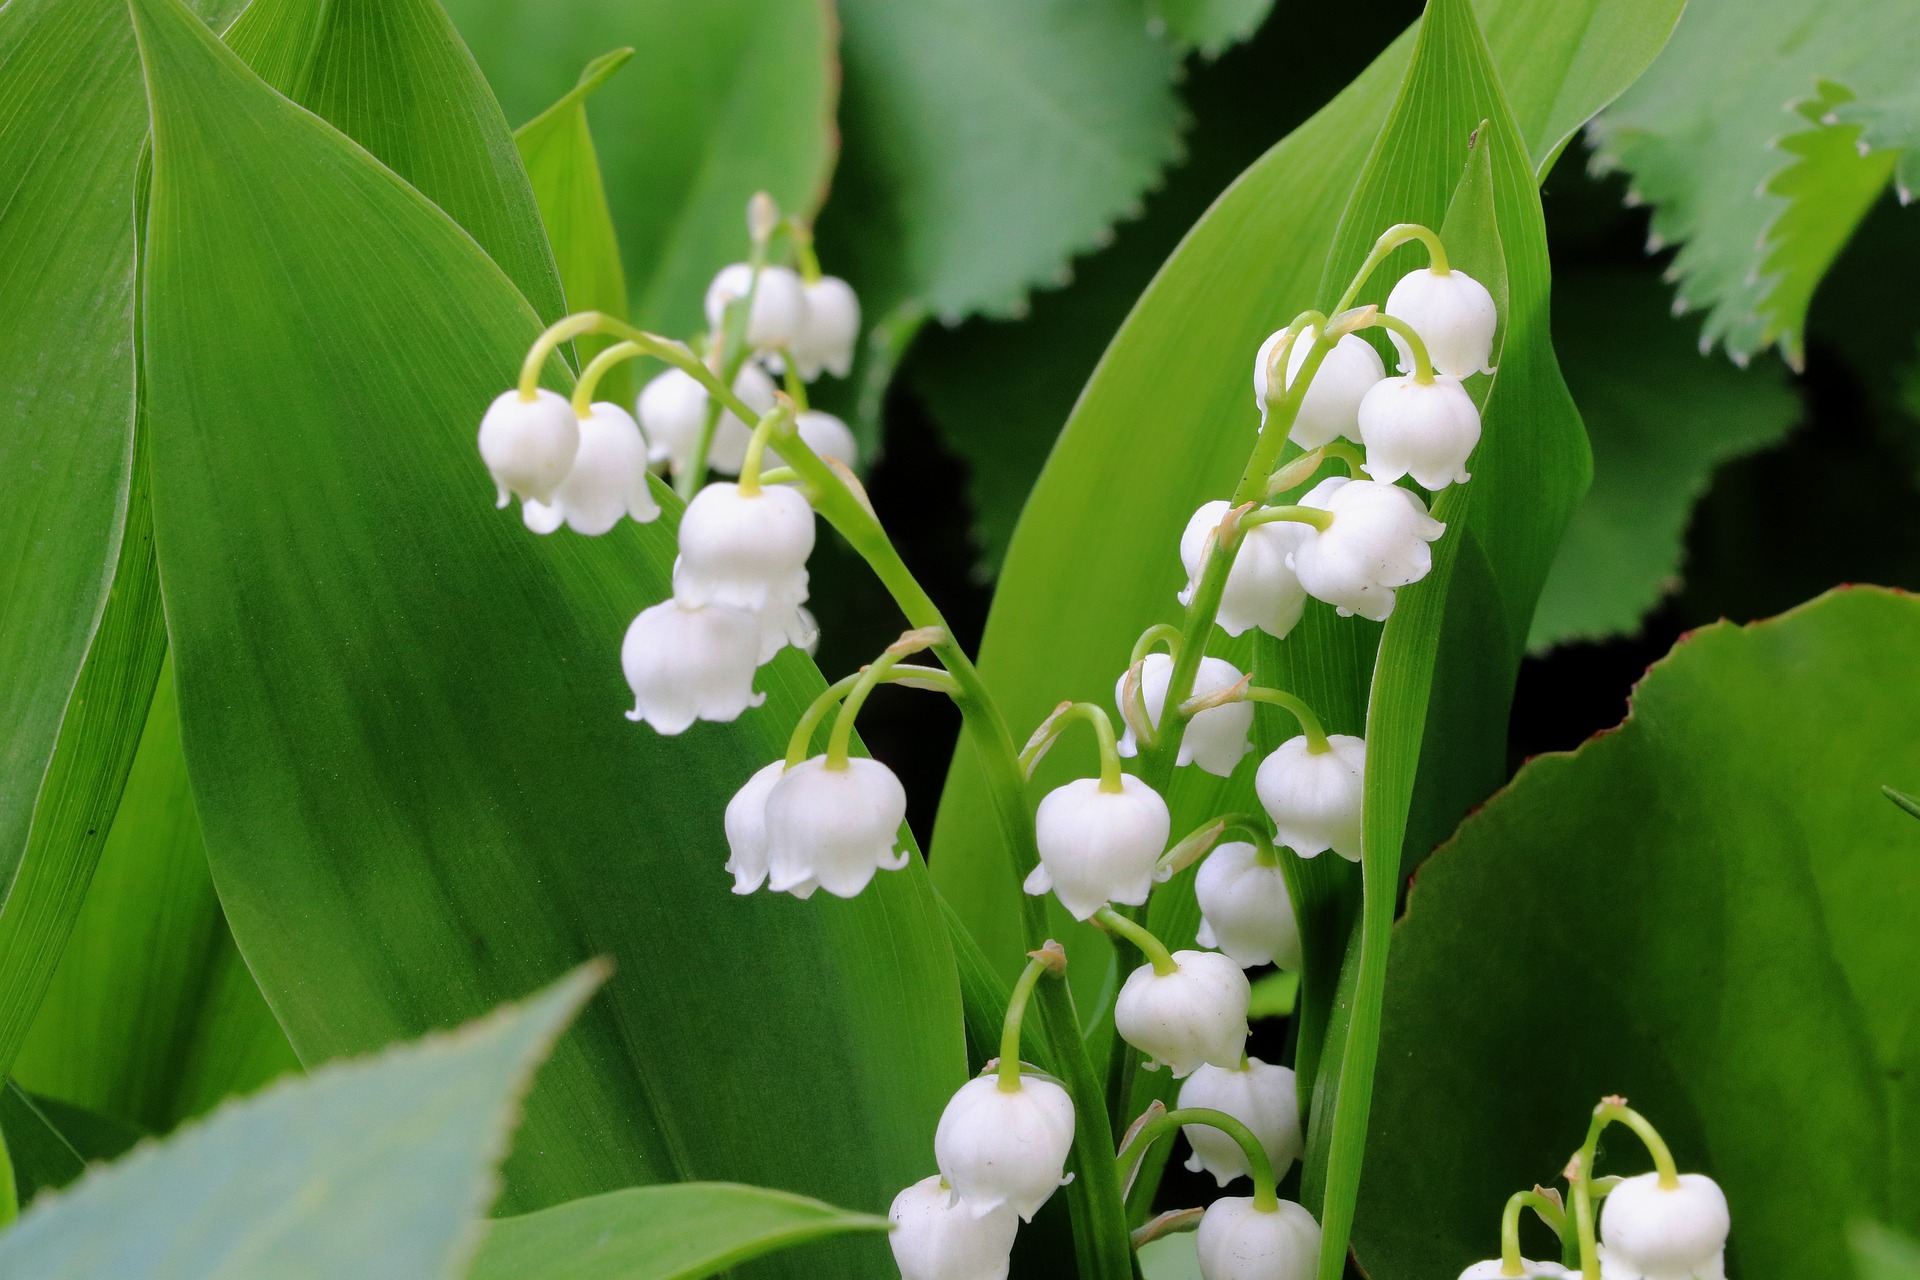 Buy Giant Lily Of The Valley Online